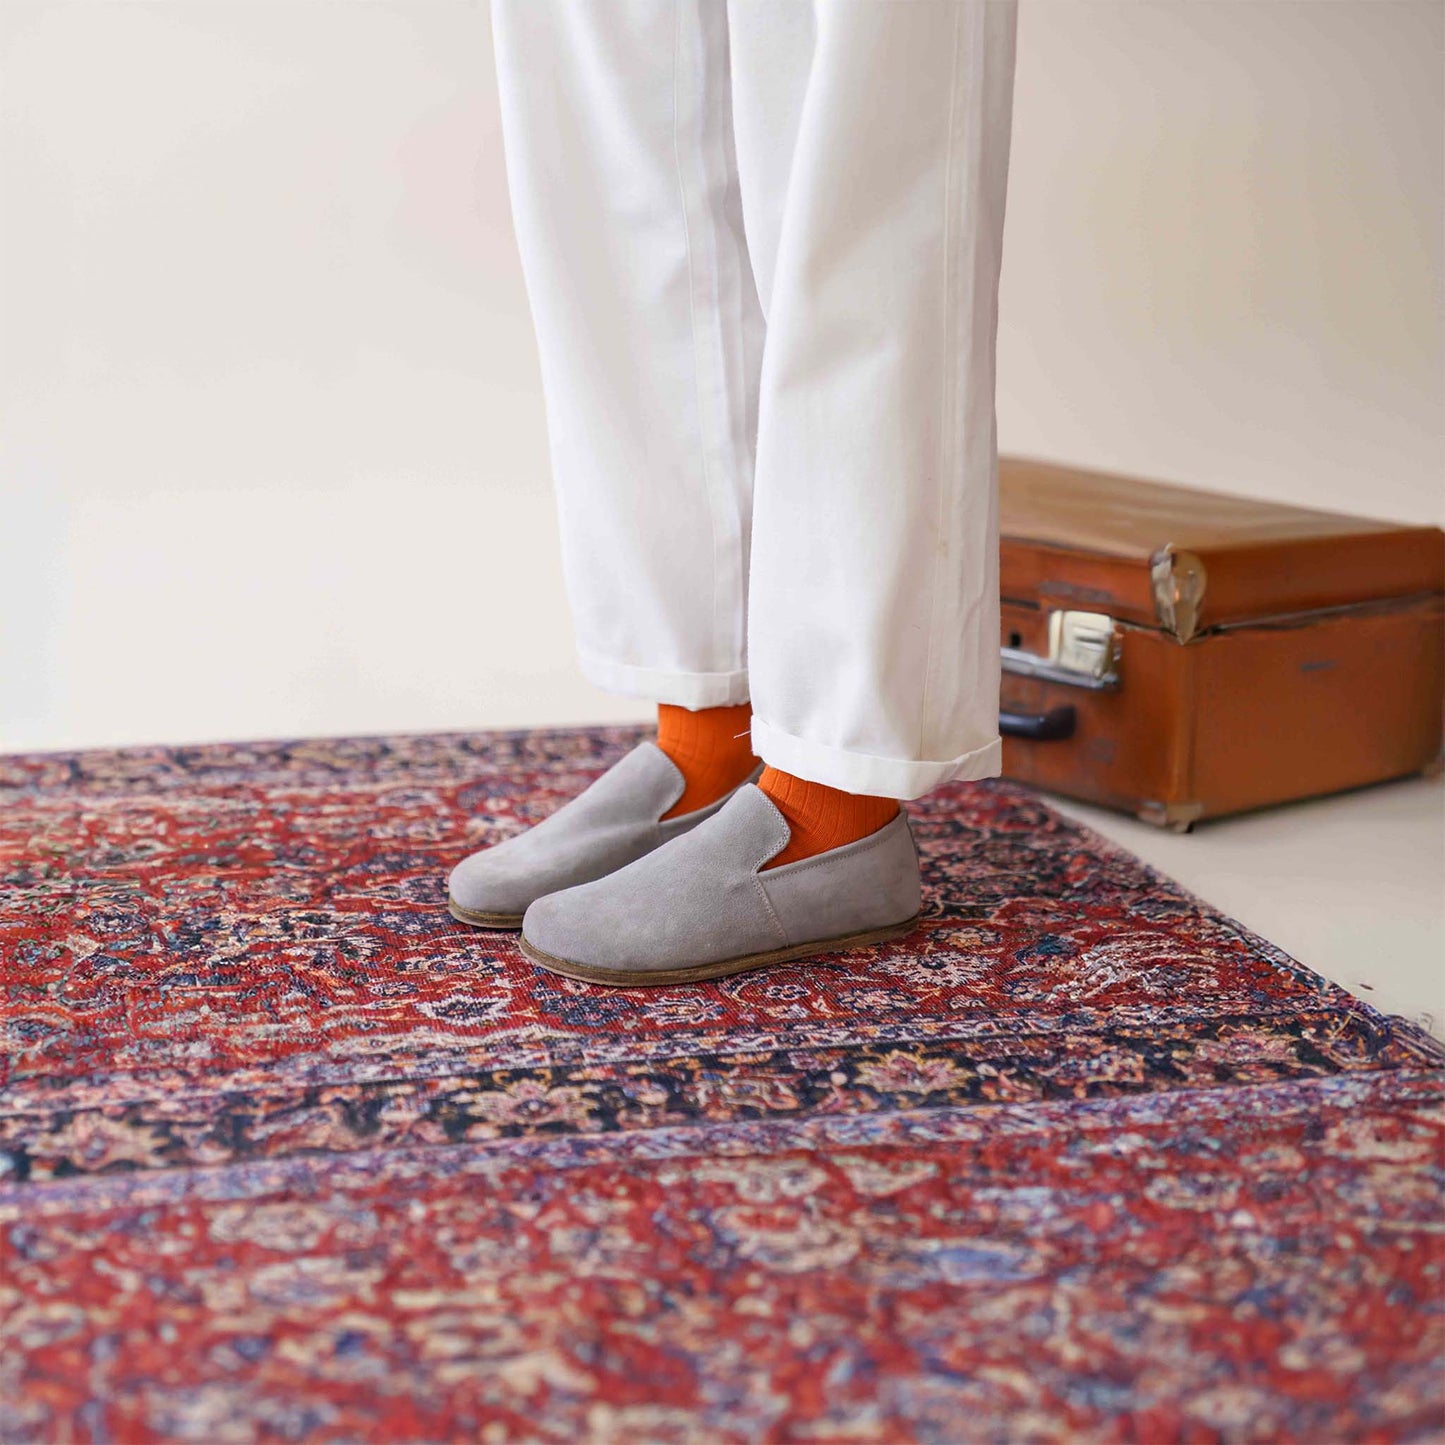 Aeolia gray suede barefoot women loafers, paired with white pants and orange socks, on a patterned rug beside a vintage suitcase.